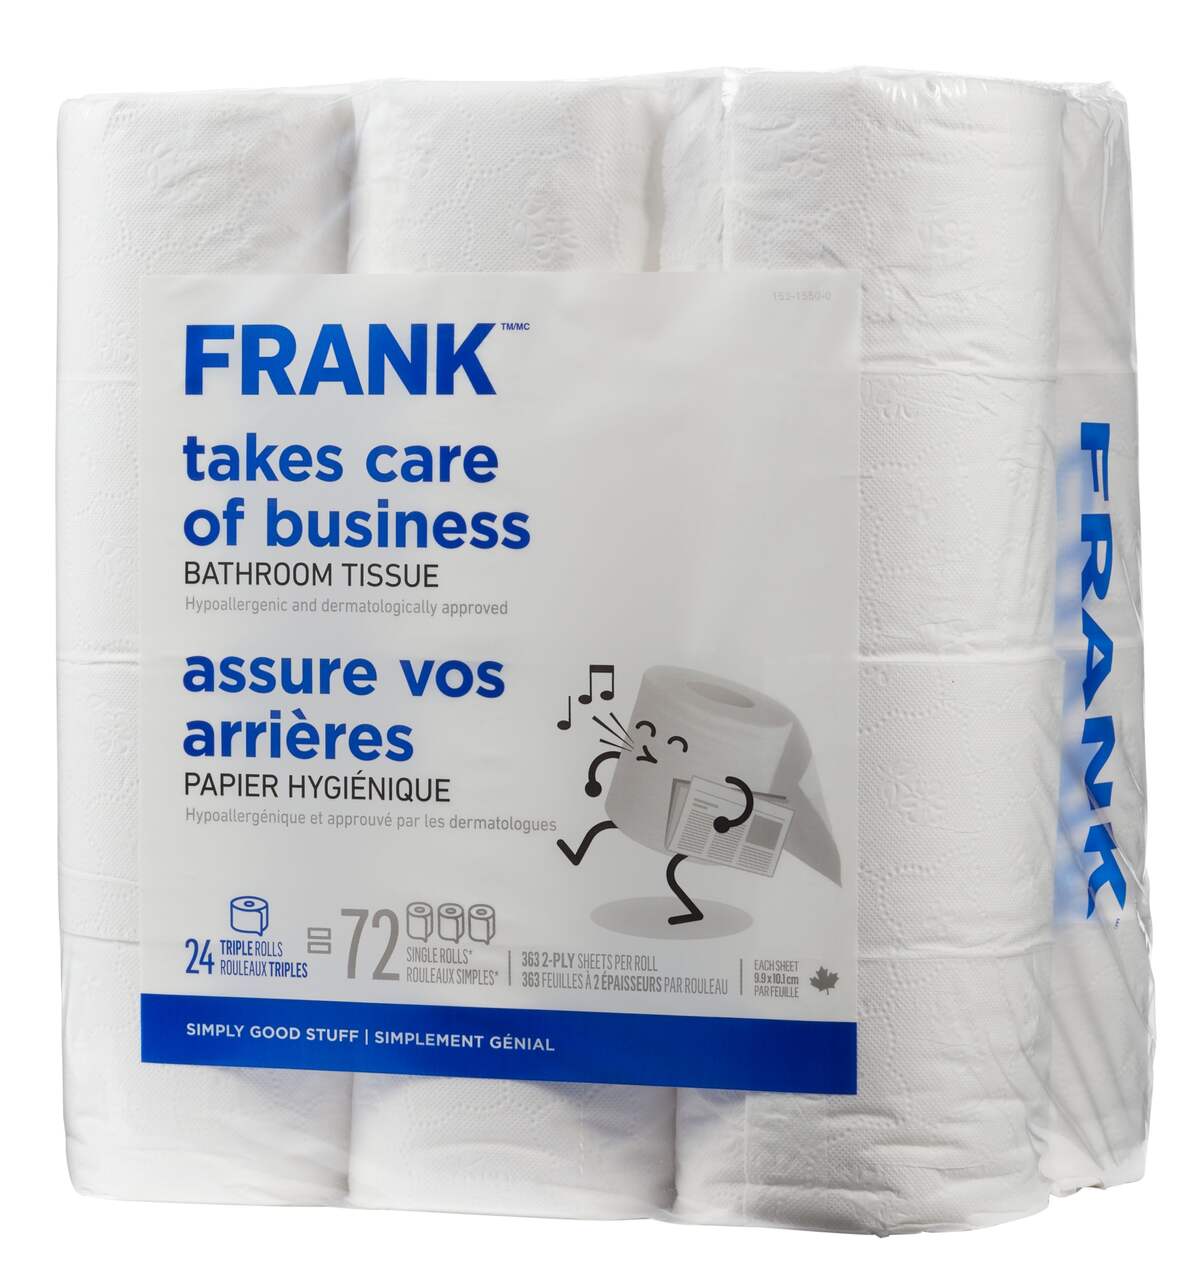 https://media-www.canadiantire.ca/product/living/home-essentials/household-consumables/1531550/frank-bathroom-tissue-24-72-rolls-6fa4987e-0f6a-4854-8714-c0f4e8cade35-jpgrendition.jpg?imdensity=1&imwidth=1244&impolicy=mZoom